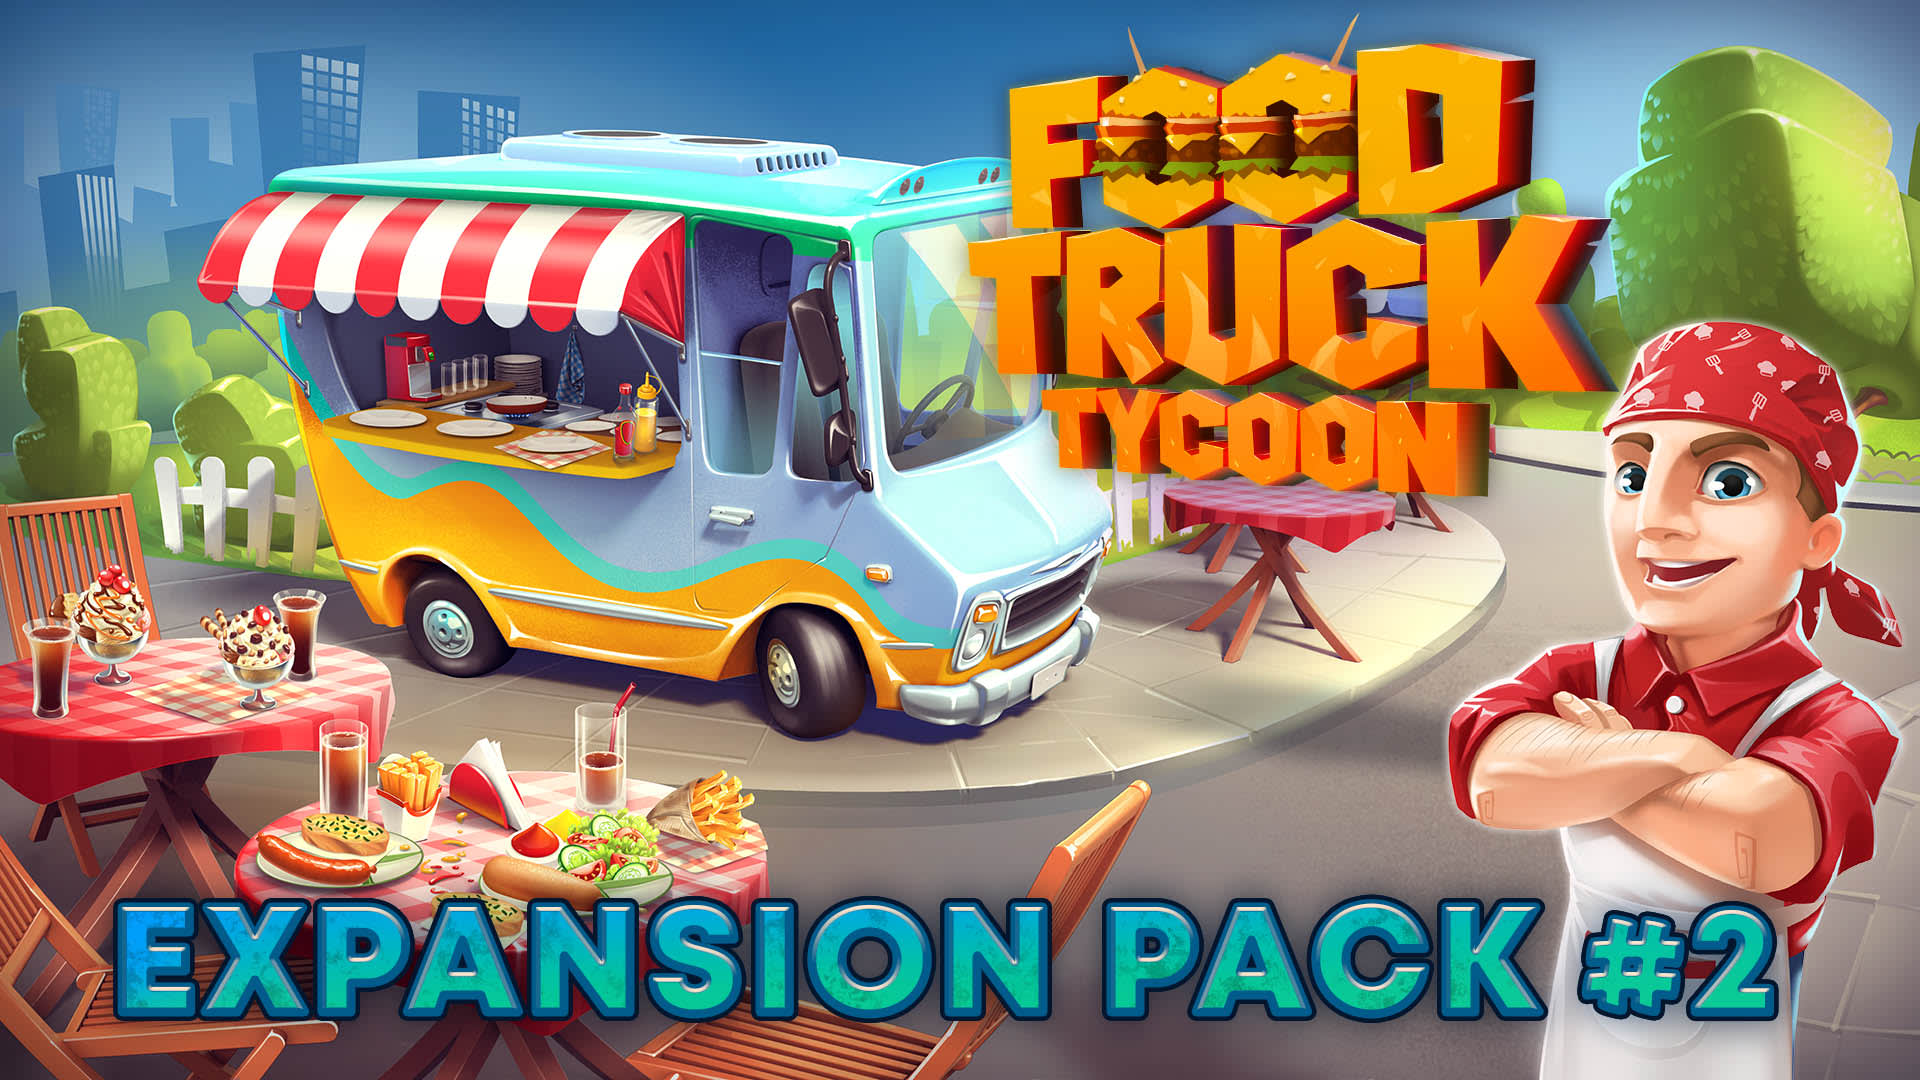 Food Truck Tycoon Expansion Pack #2